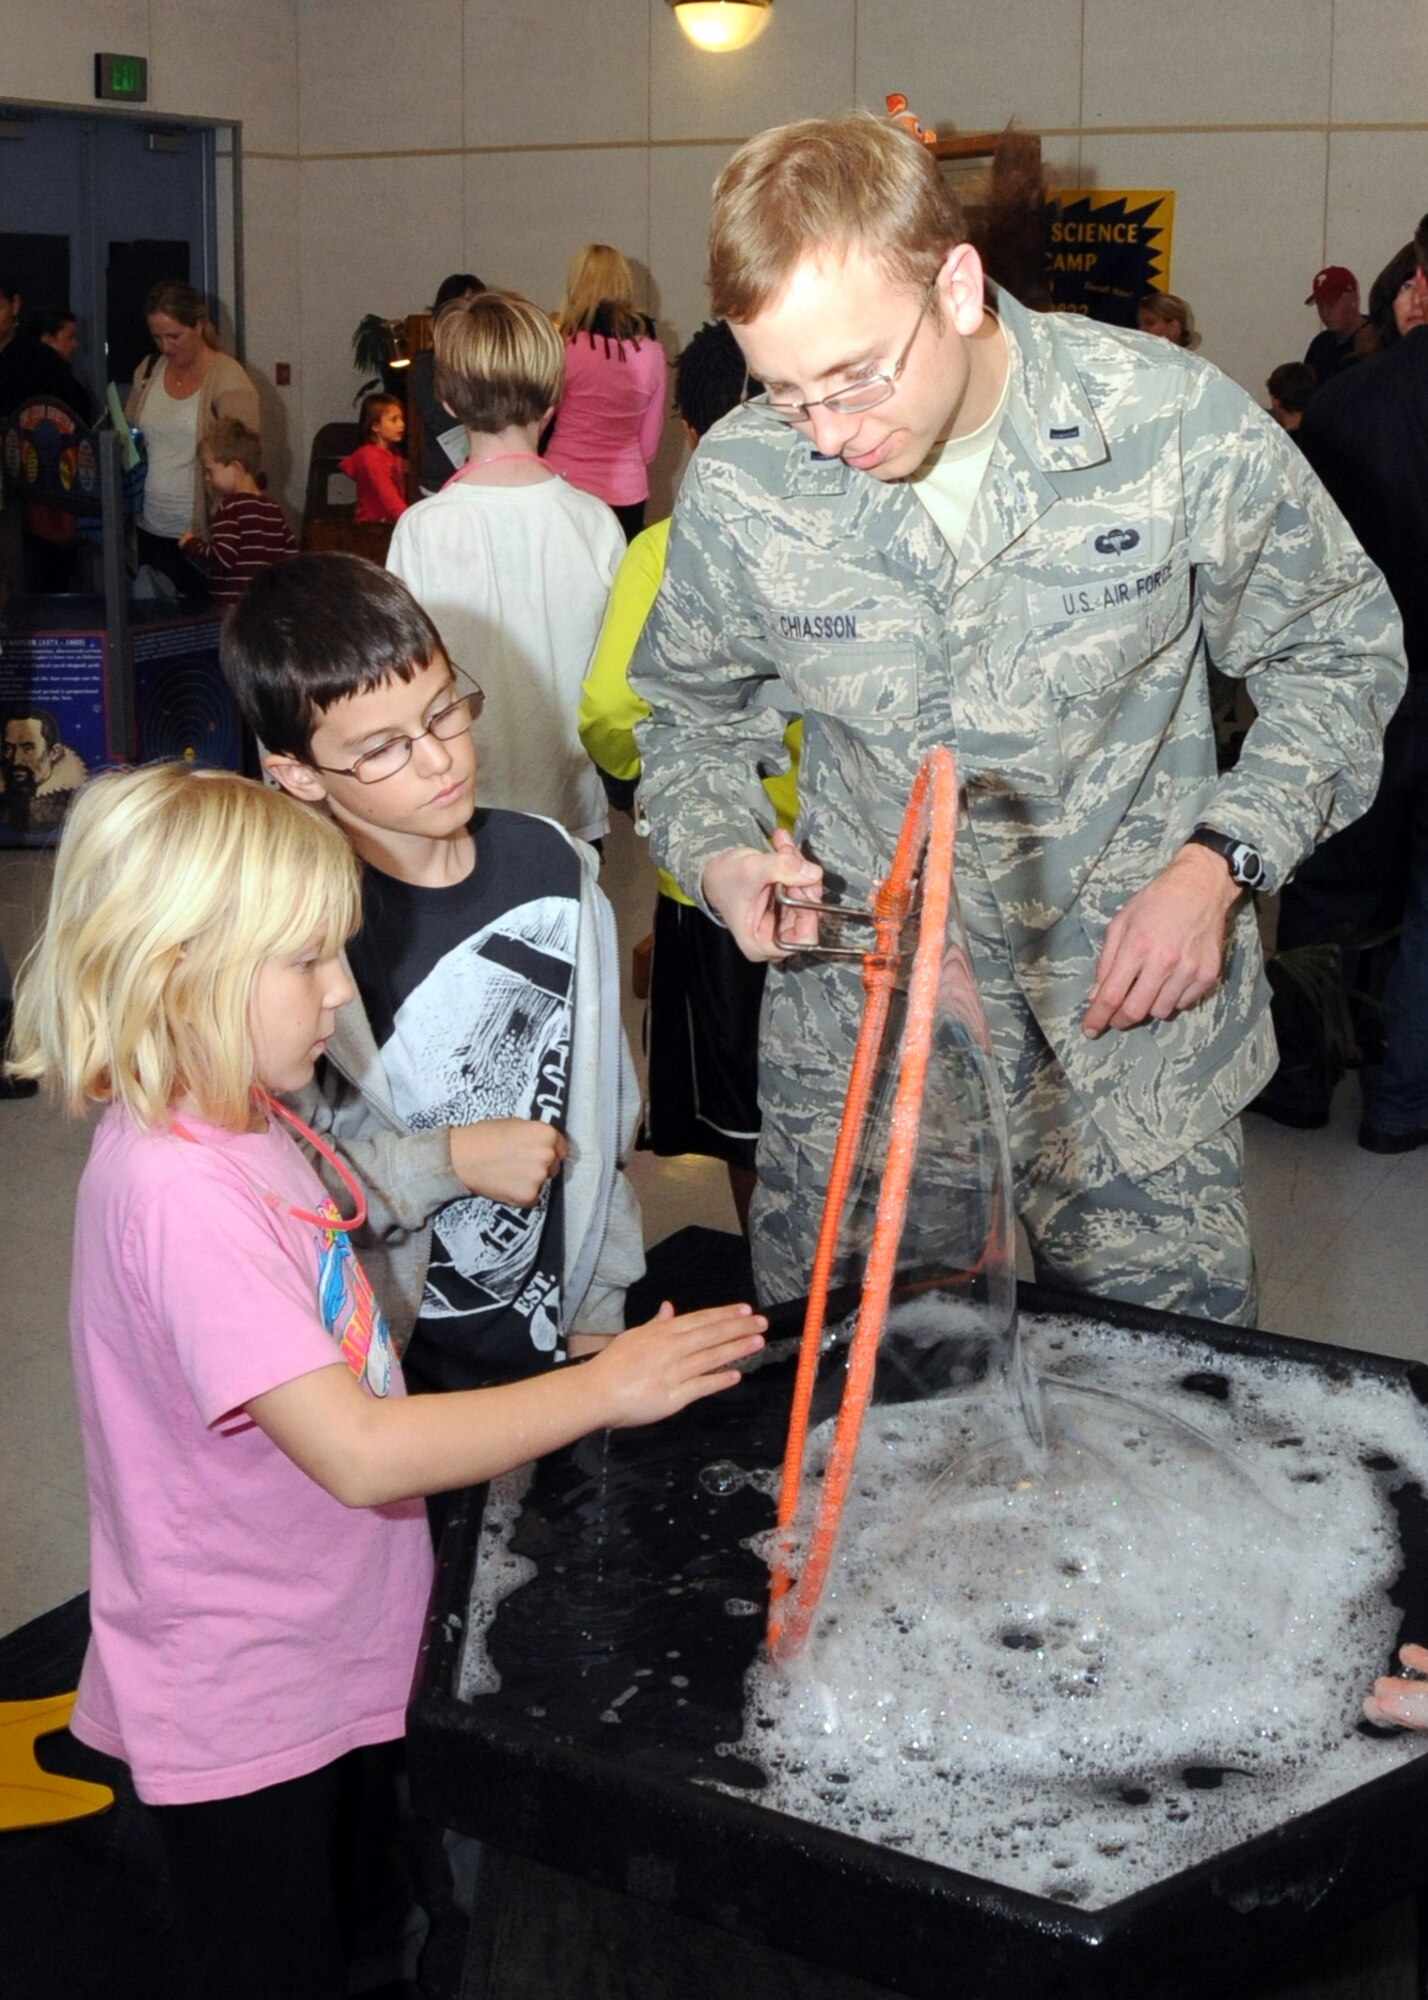 Lt. Thomas Chiasson works with students at a Science, Technology, Engineering and Mathematics (STEM) event held at El Segundo’s Richmond Street School, Jan. 23. Air Force volunteers manned various experiment stations during the event.  (Photo by Jim Gordon)